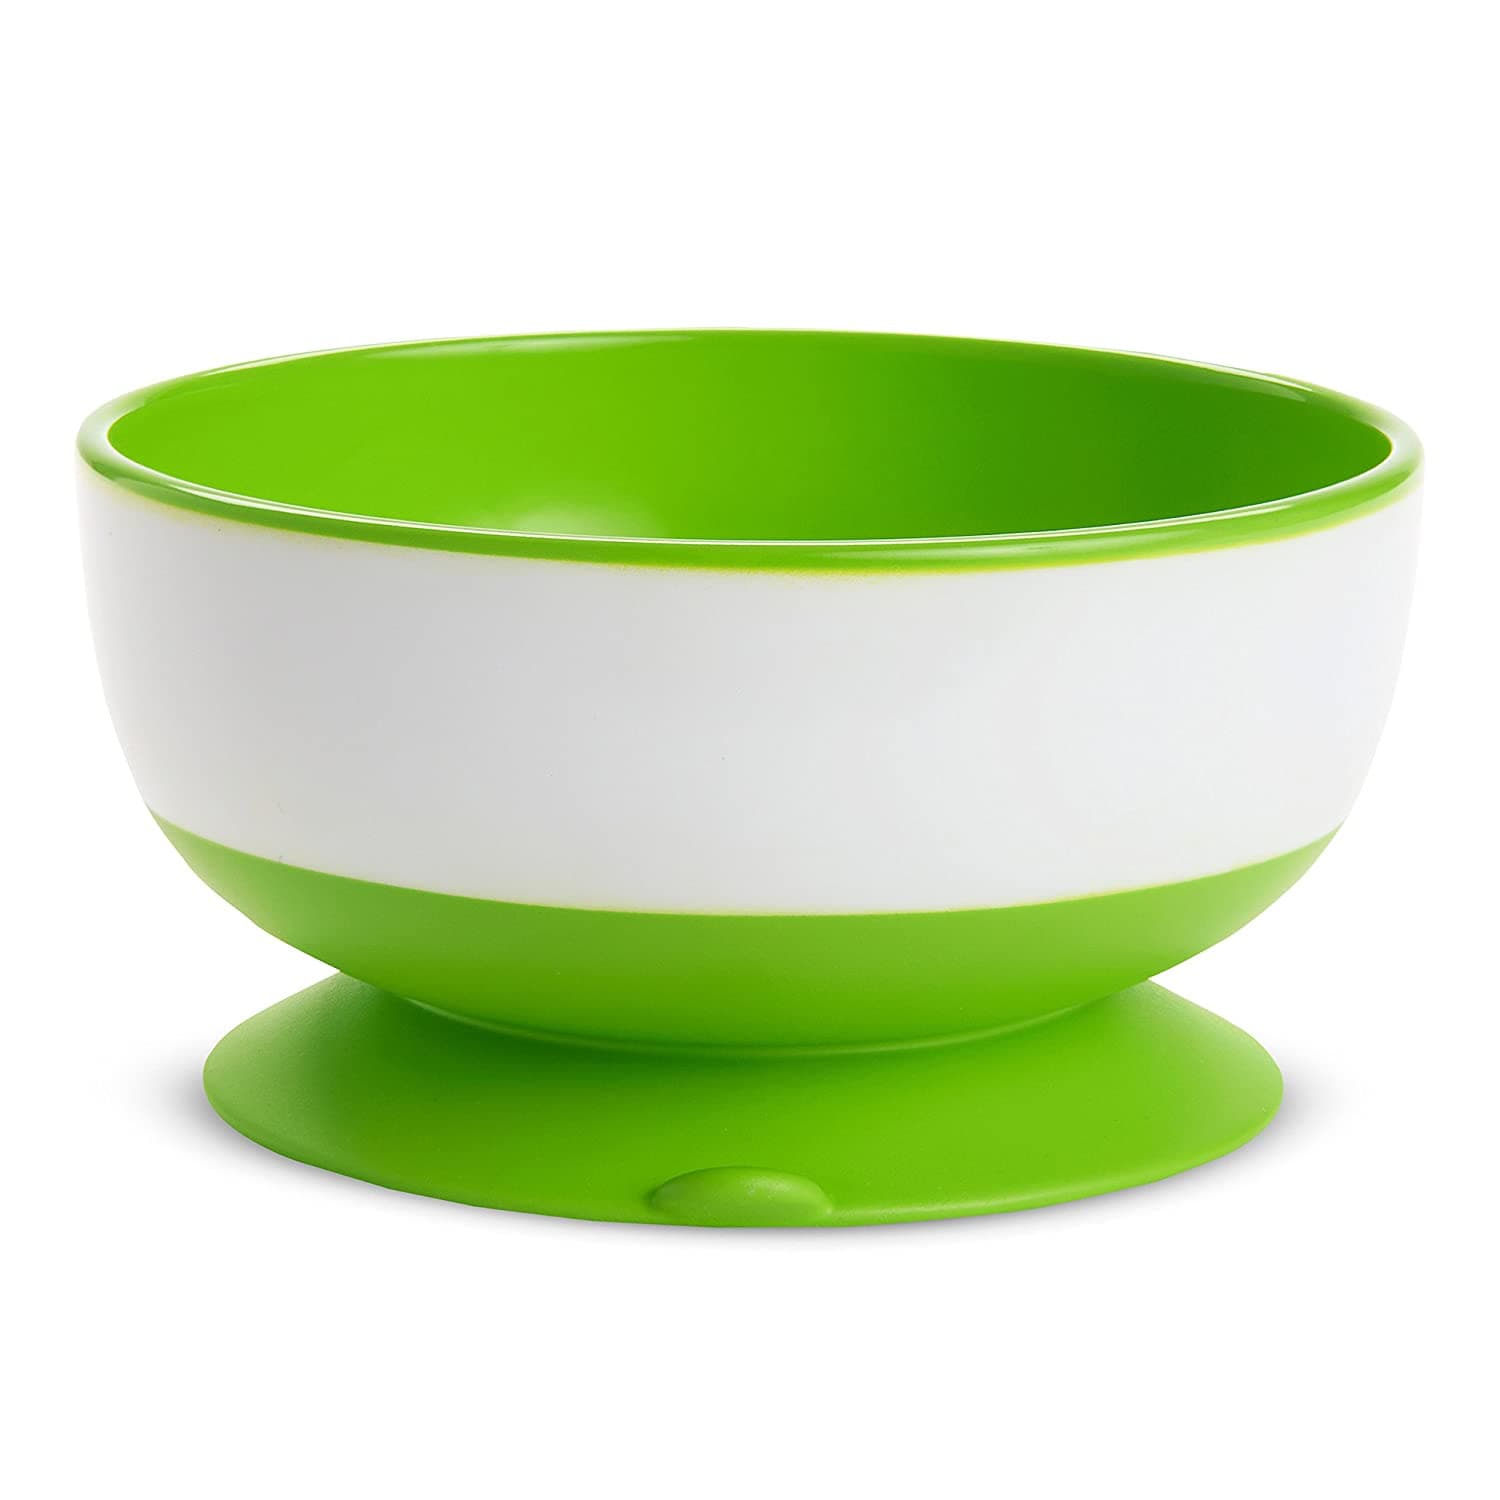 Munchkin Stay Put Suction Bowl, 3 Pack.